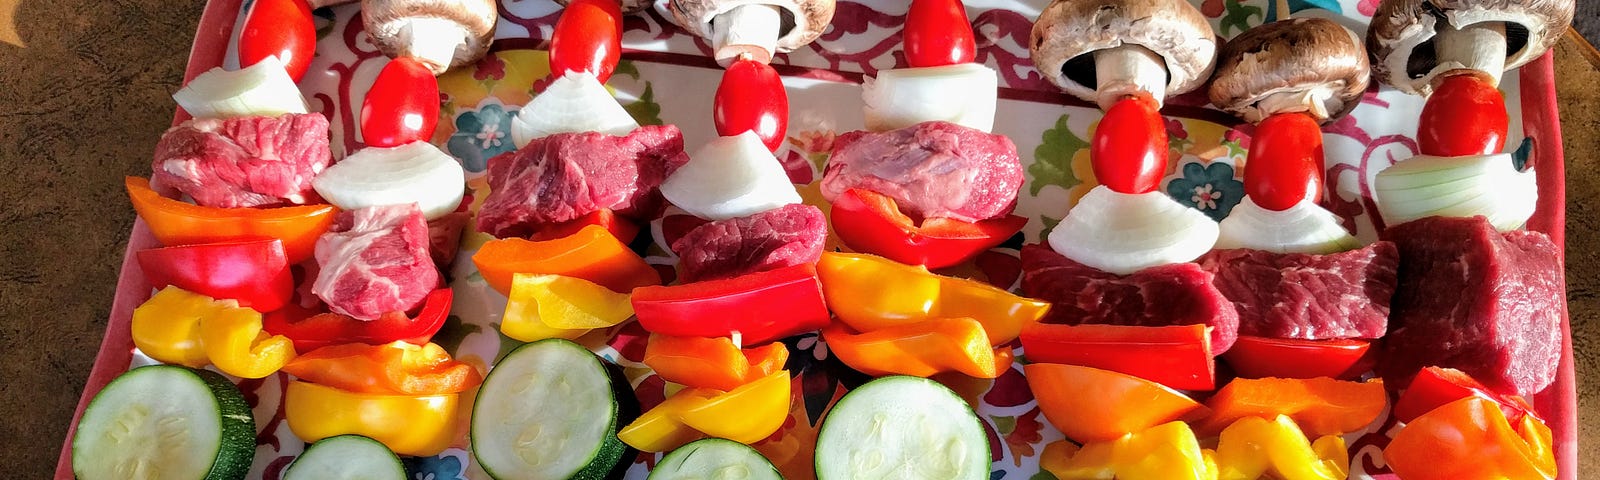 This photo shows kabobs with vegetables and meat on a platter.